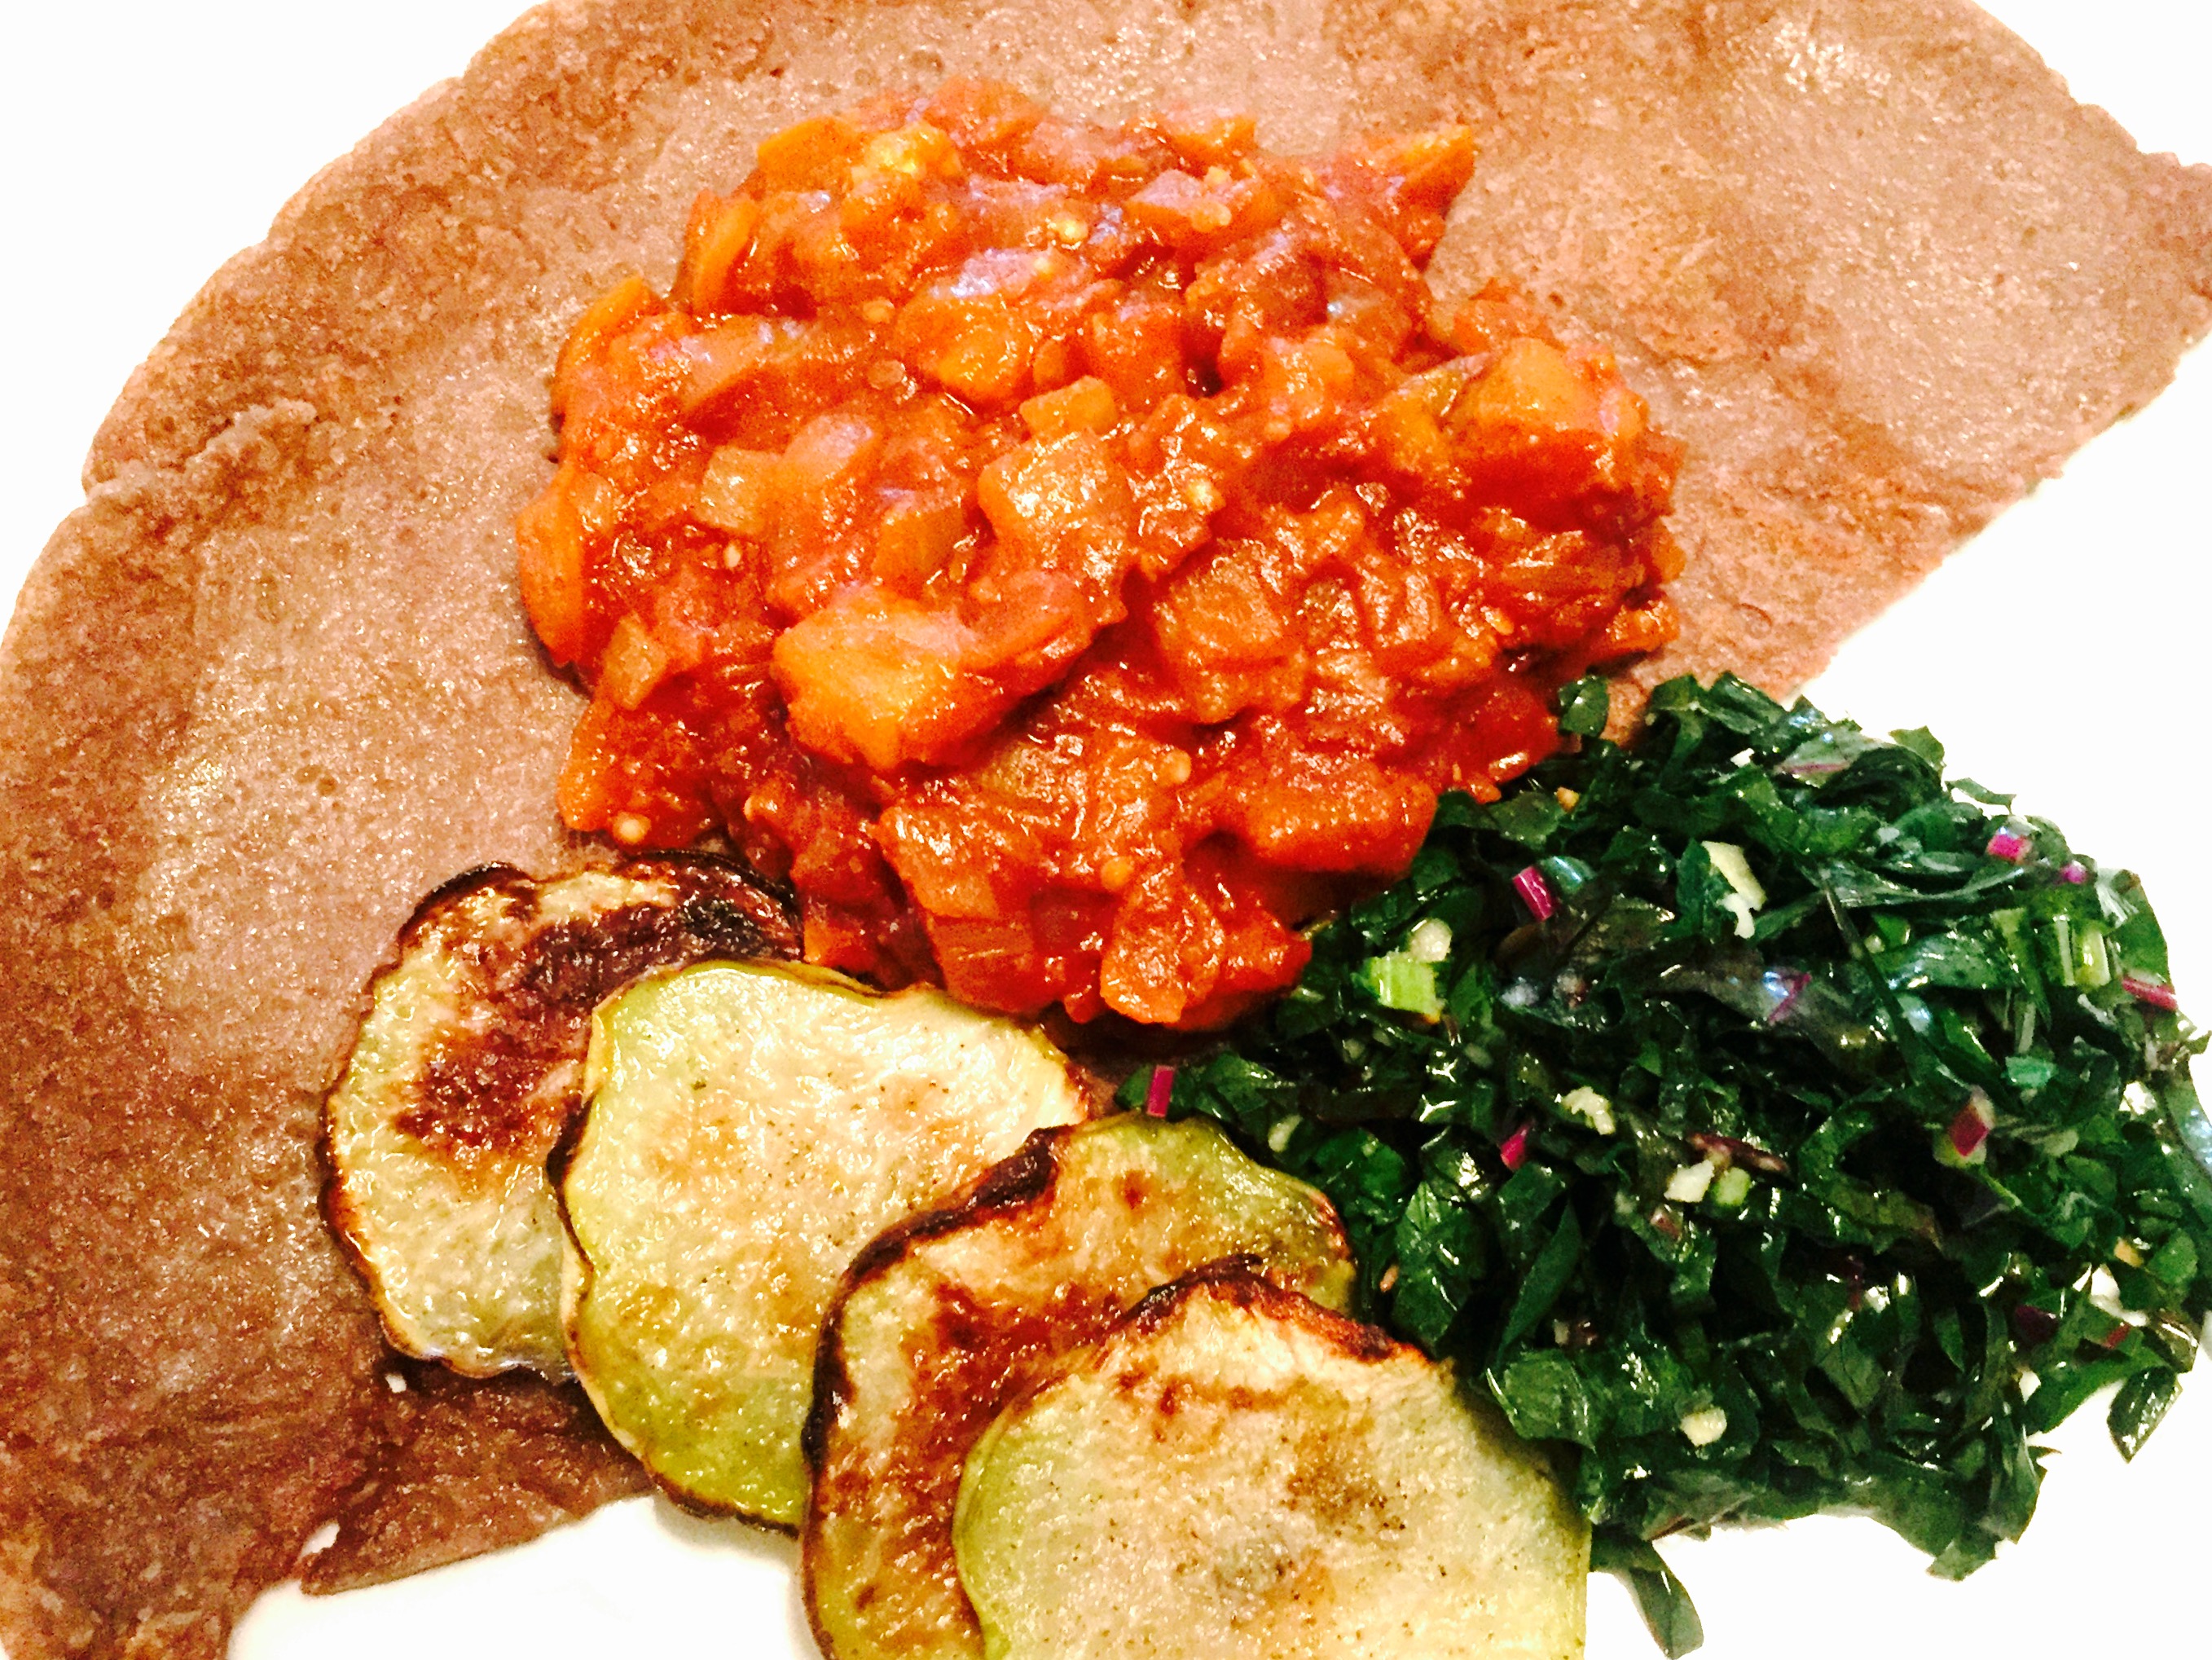 Ethiopian eggplant wot on home-made injera with roasted kohlrabi chips and fresh salad made from the kohlrabi greens